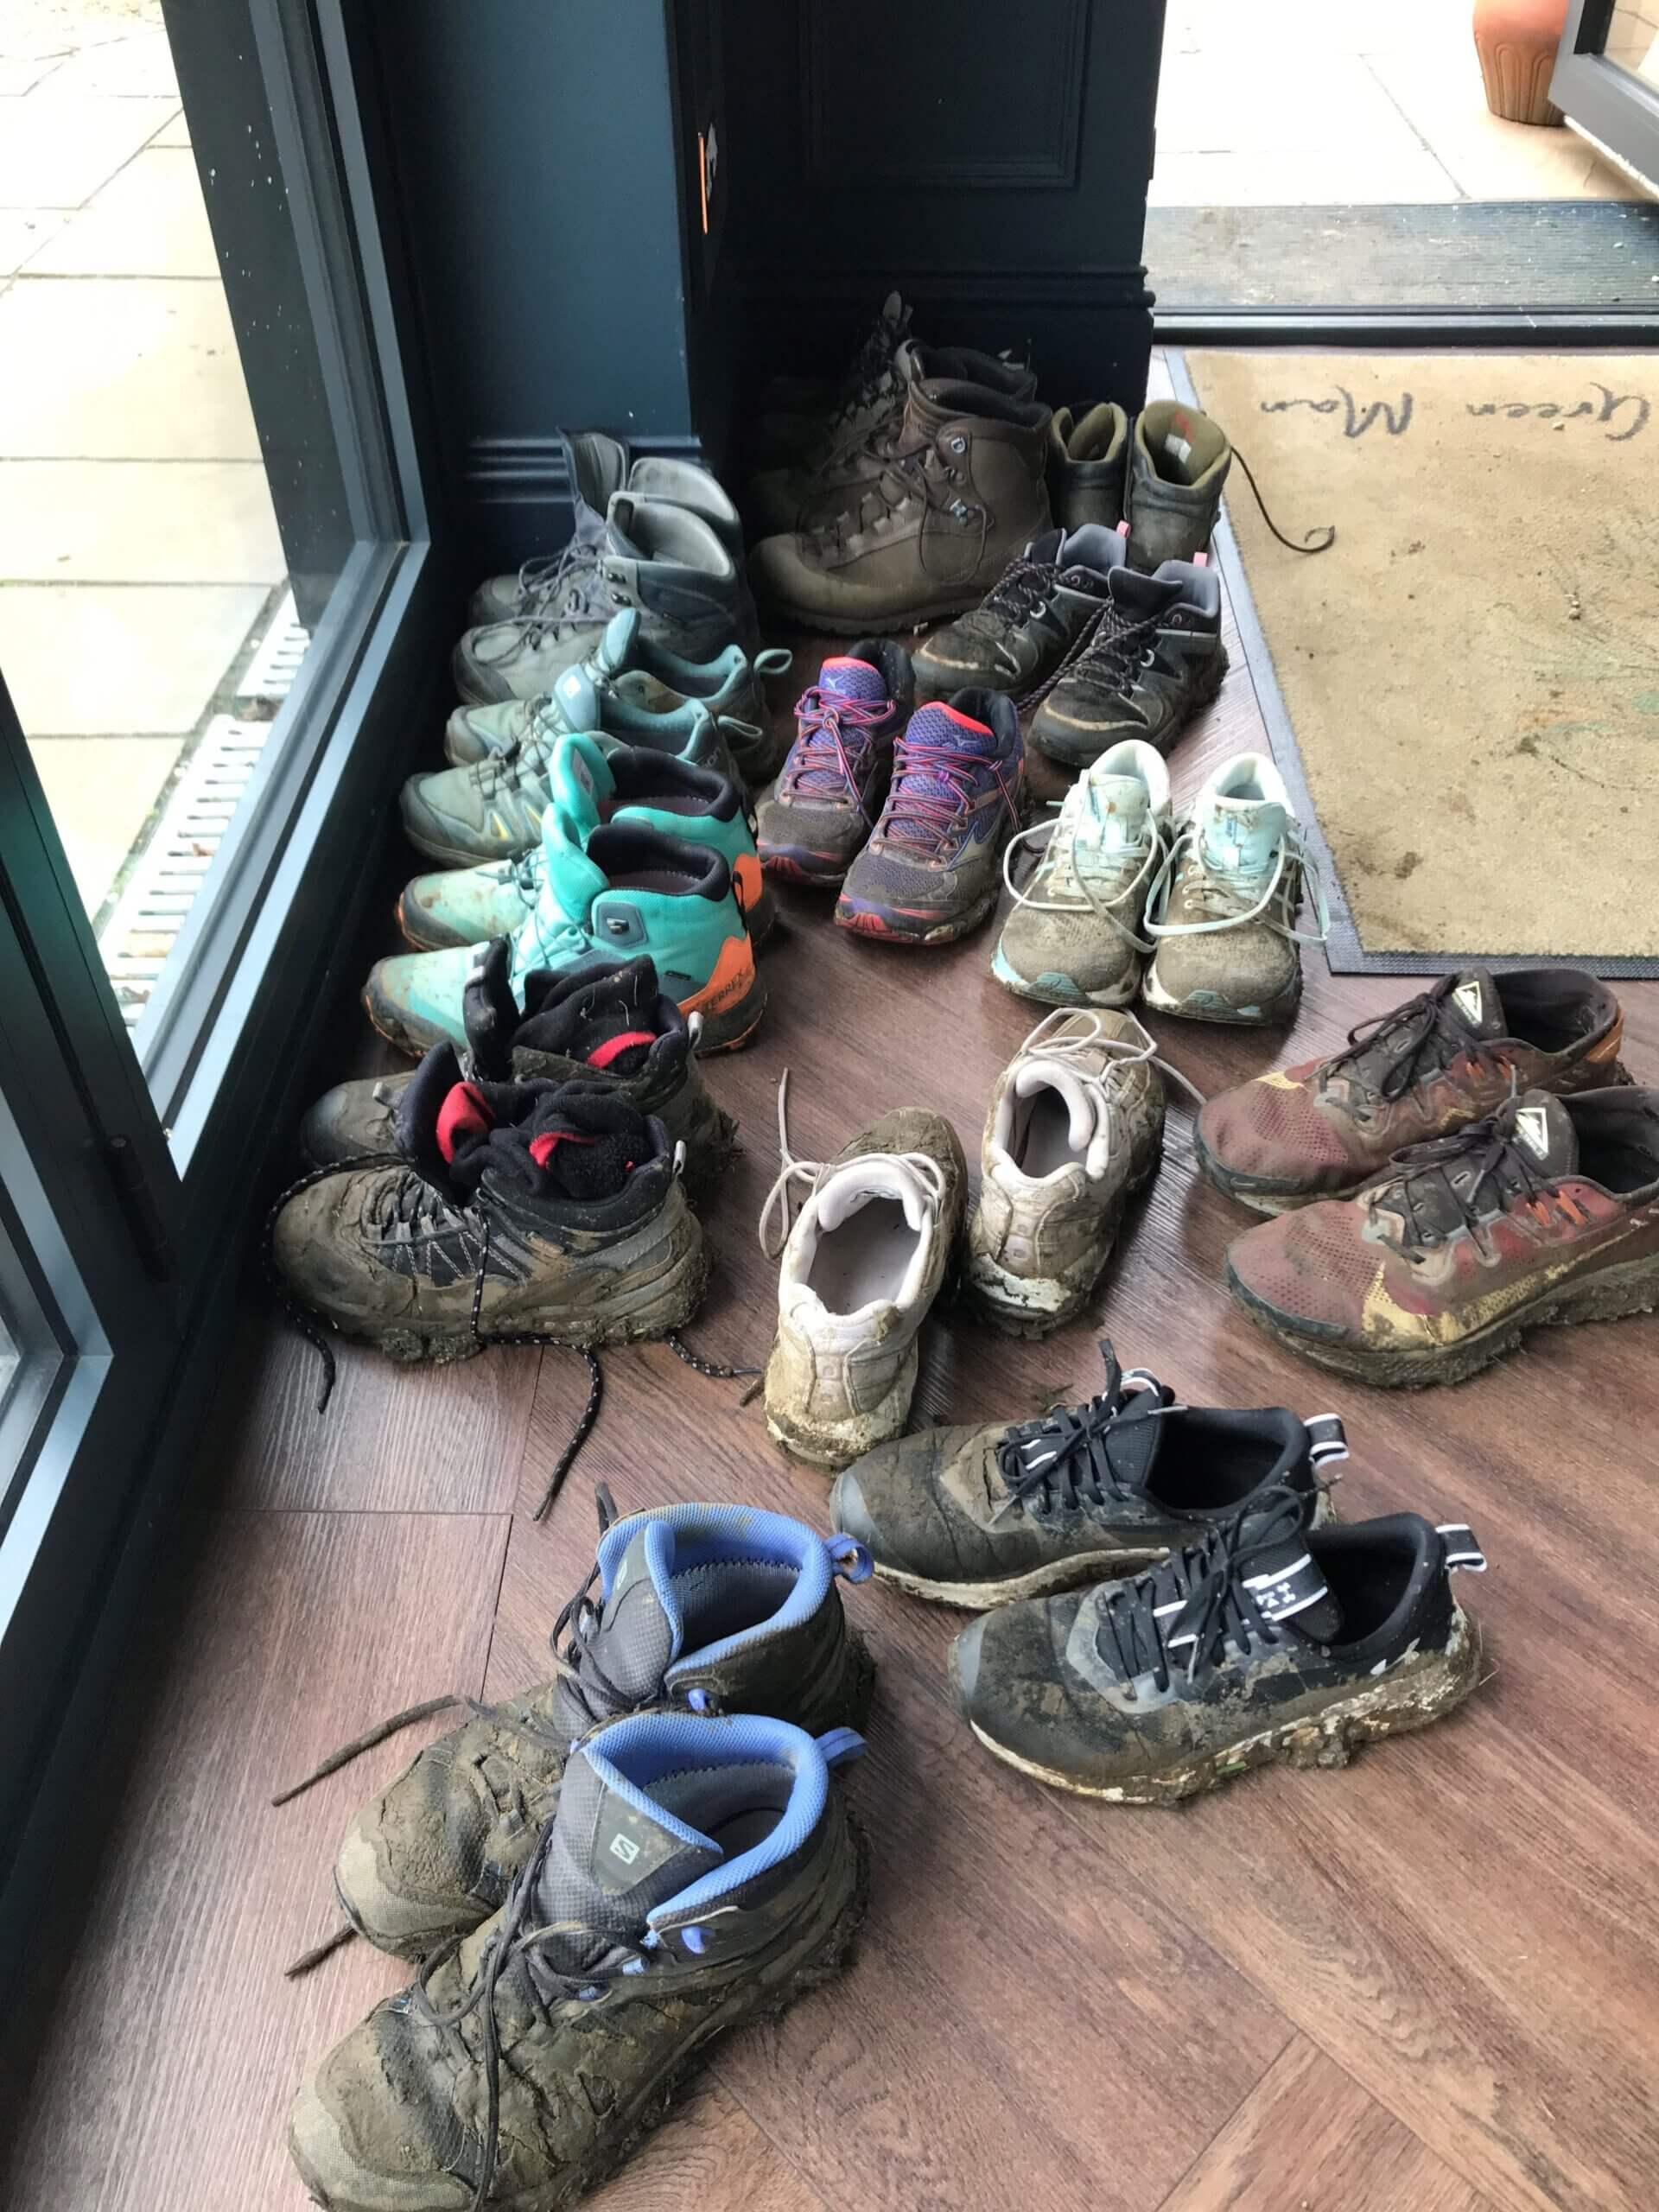 A collection of muddy boots on the floor